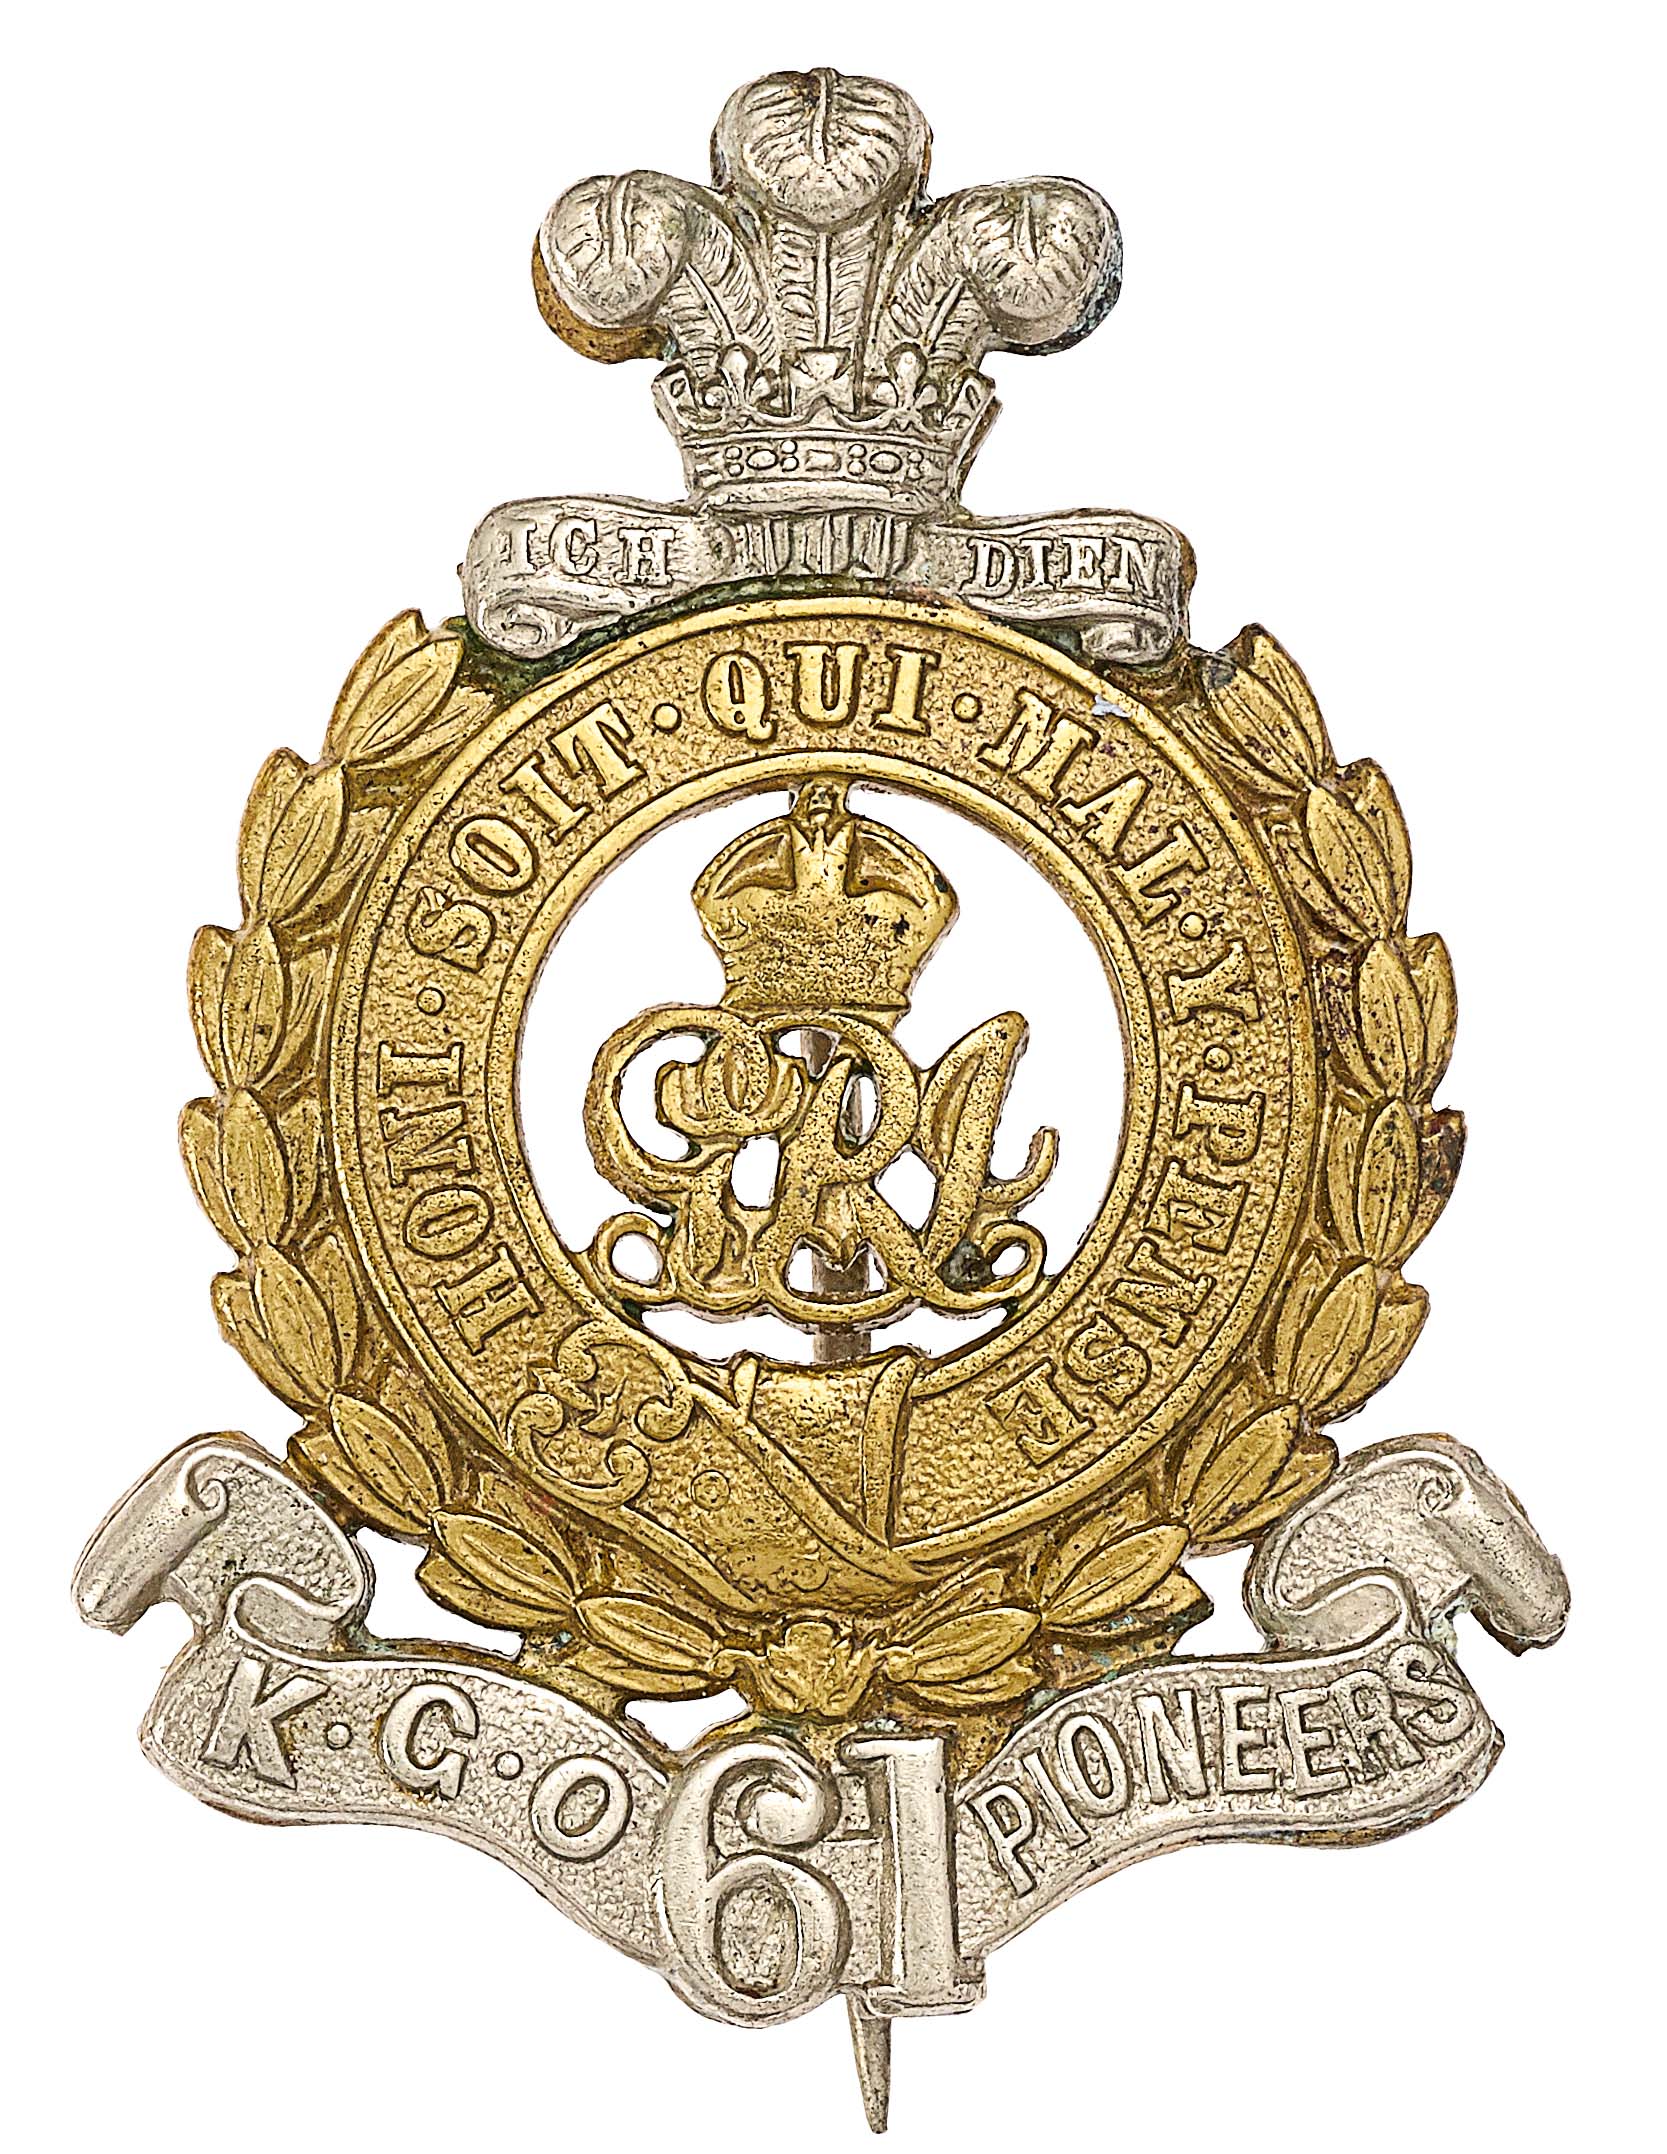 Indian Army. 61st King George’s Own Pioneers pagri badge circa 1911-22.